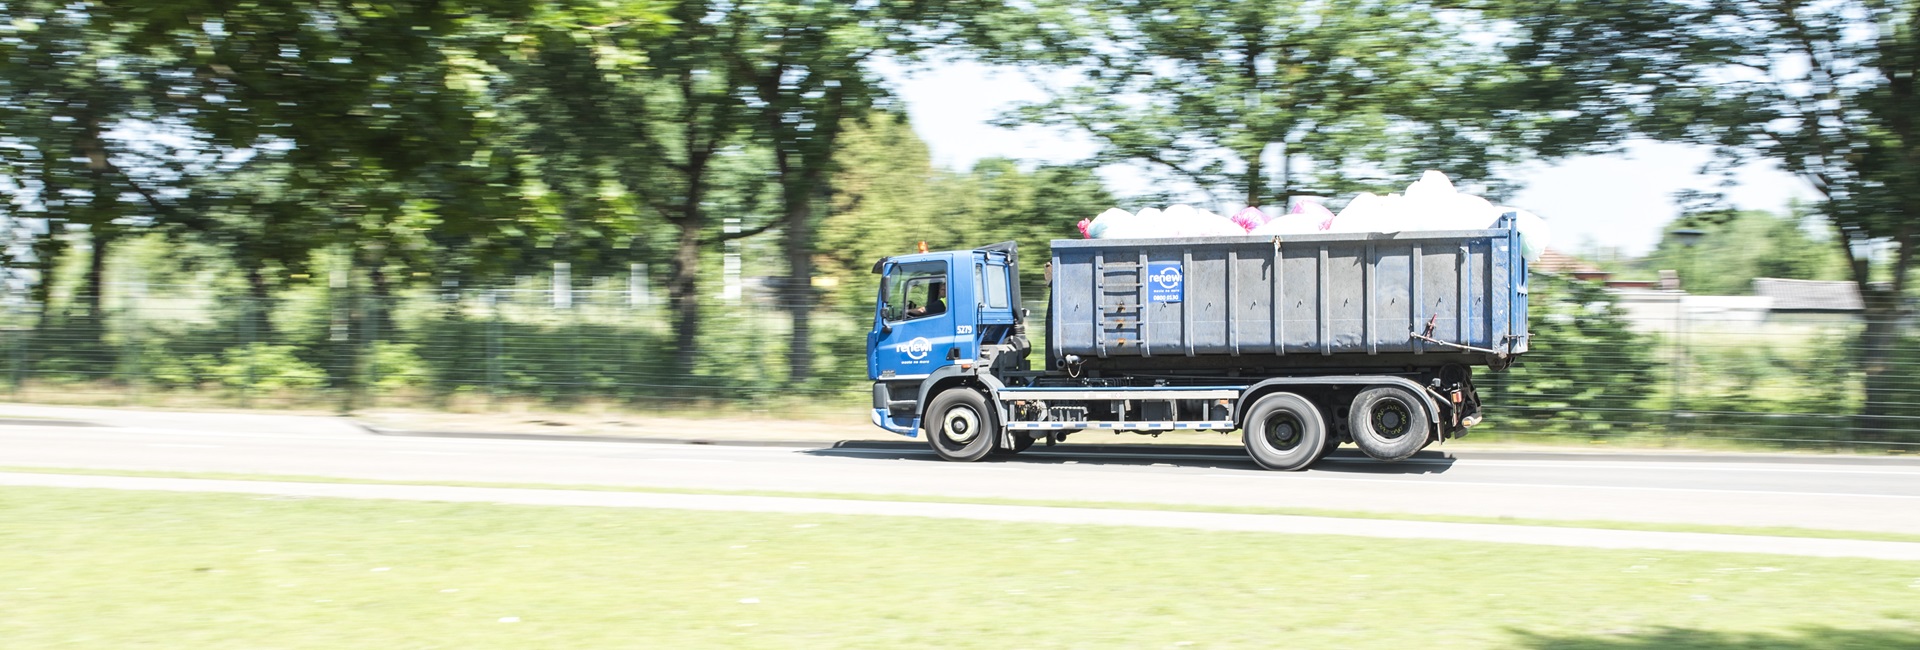 DAF-Environment-Waste-Collection-Truck-Renewi